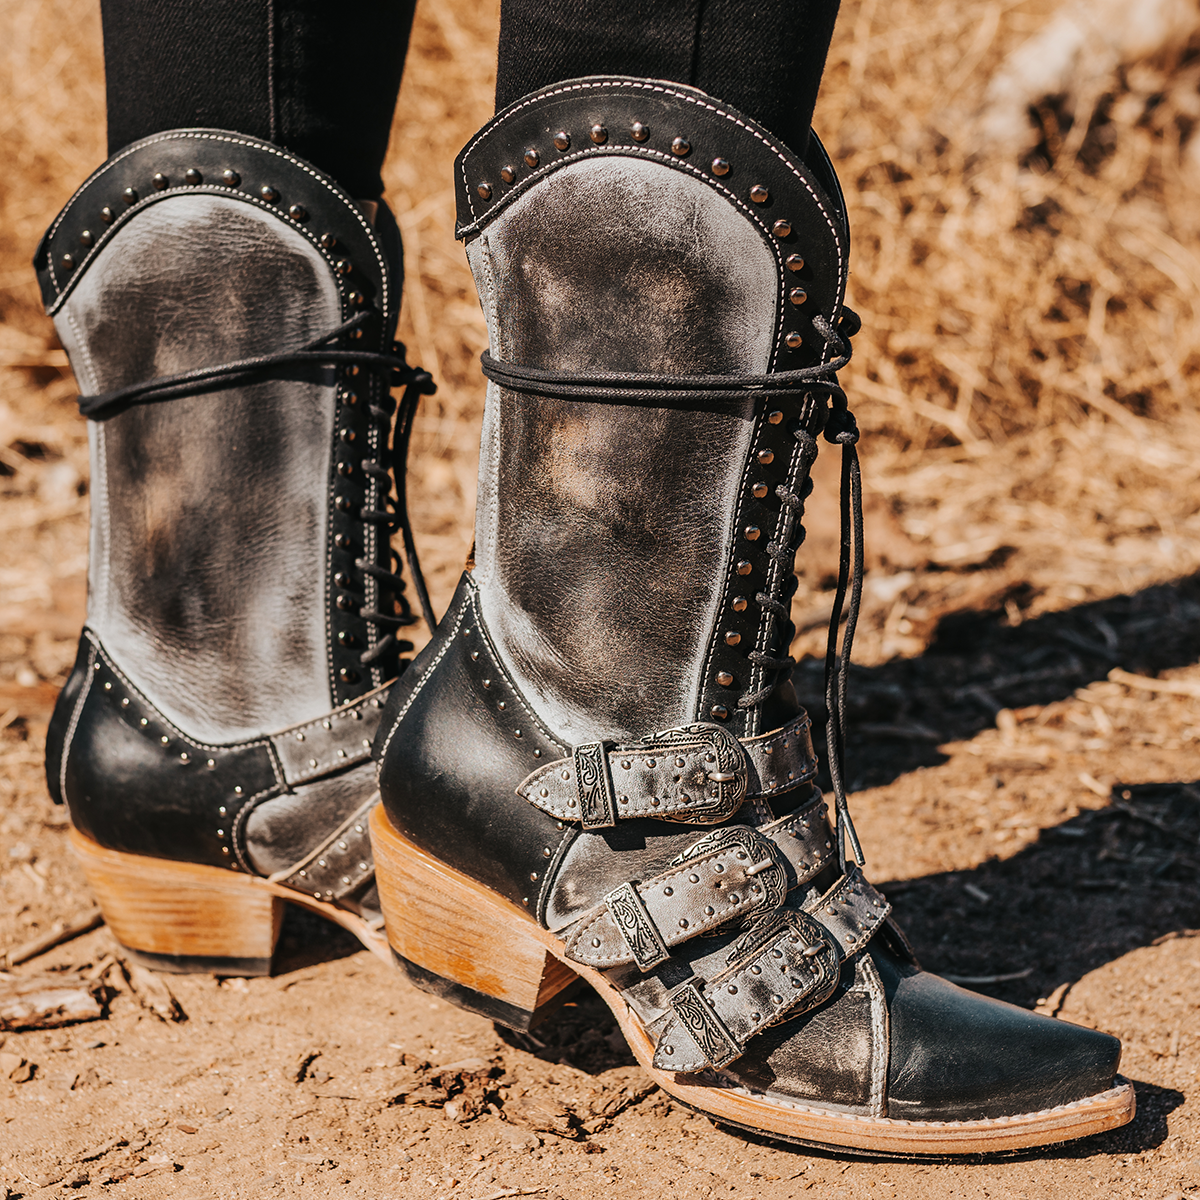 FREEBIRD women's Winnie ice multi boot featuring a lace up shaft, leather accents, and a back brass zip closure